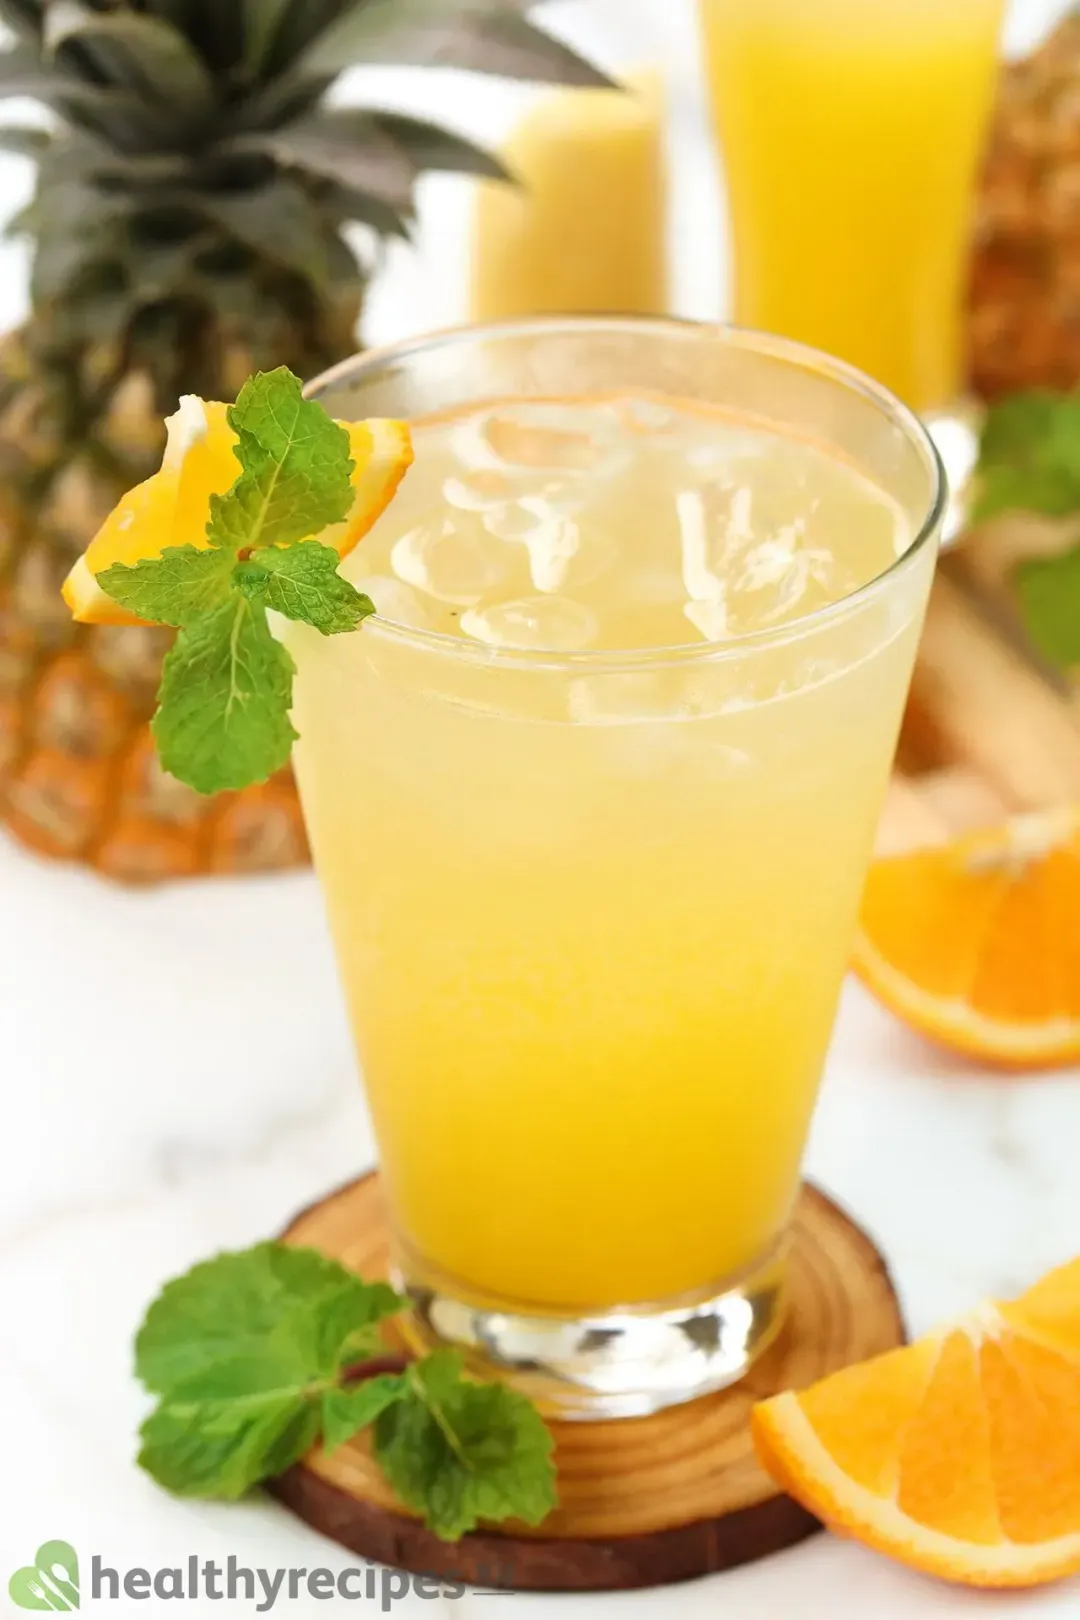 An iced glass of orange juice, rum, and soda put over a wooden coaster and next to mints, orange wedges